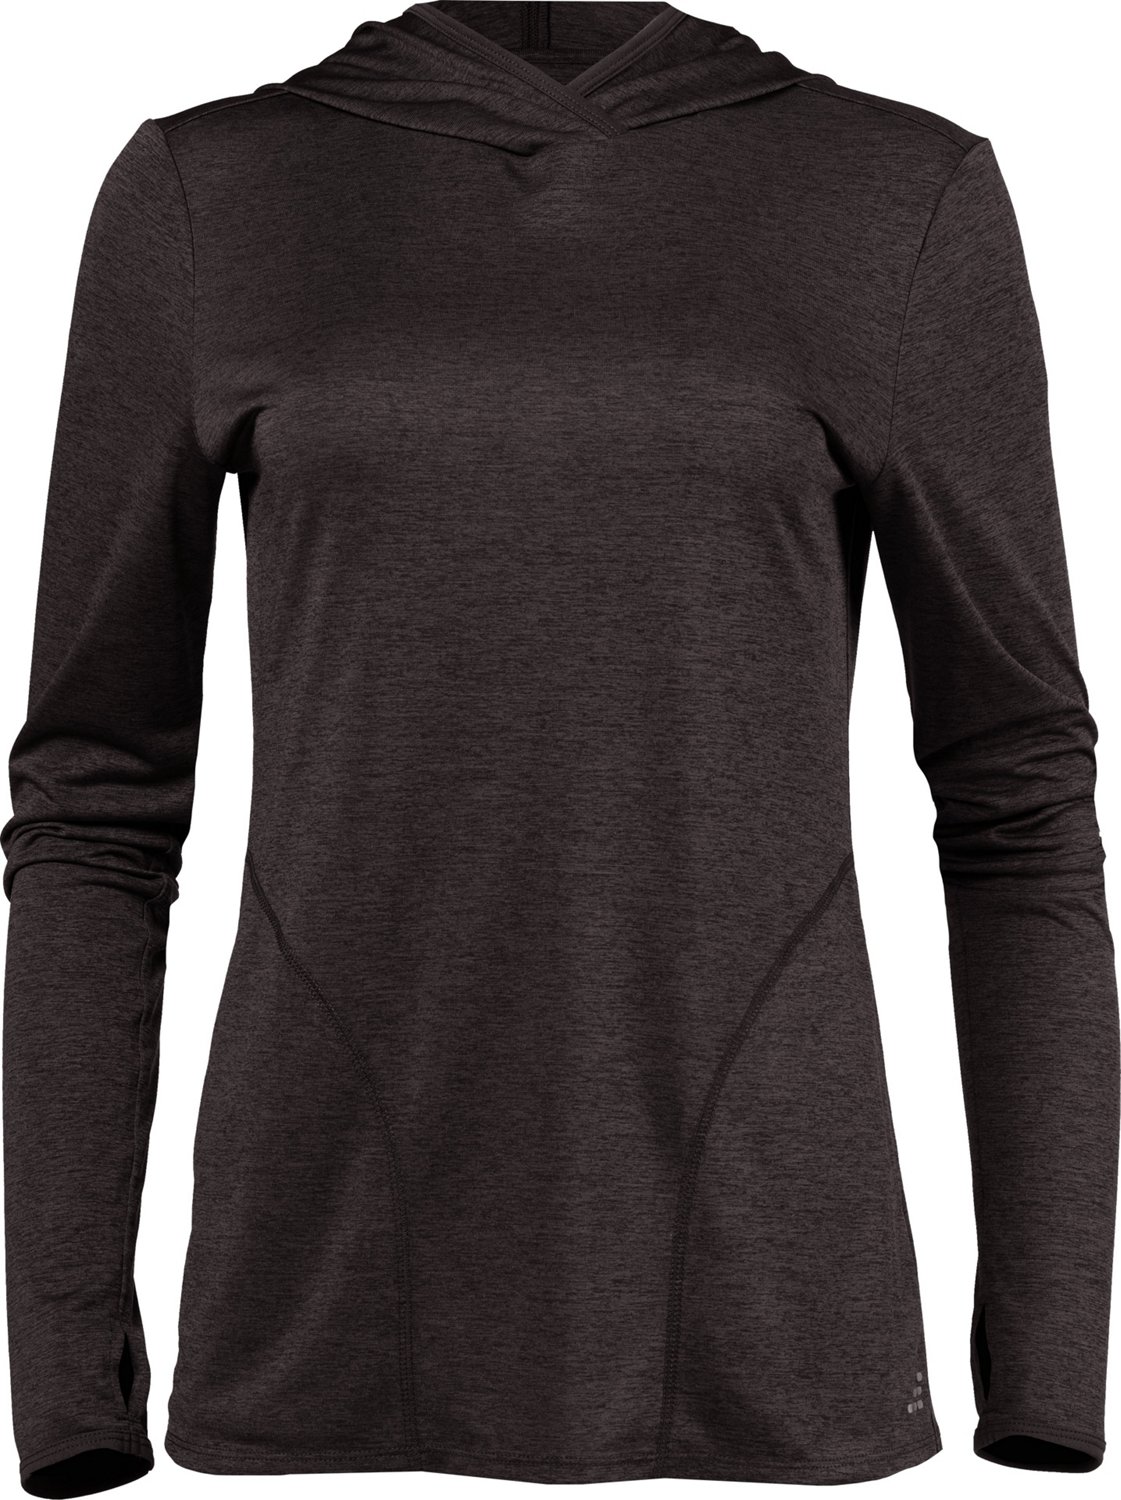 Academy Sports BCG Women's Washed Funnel Neck Hoodie 19.99